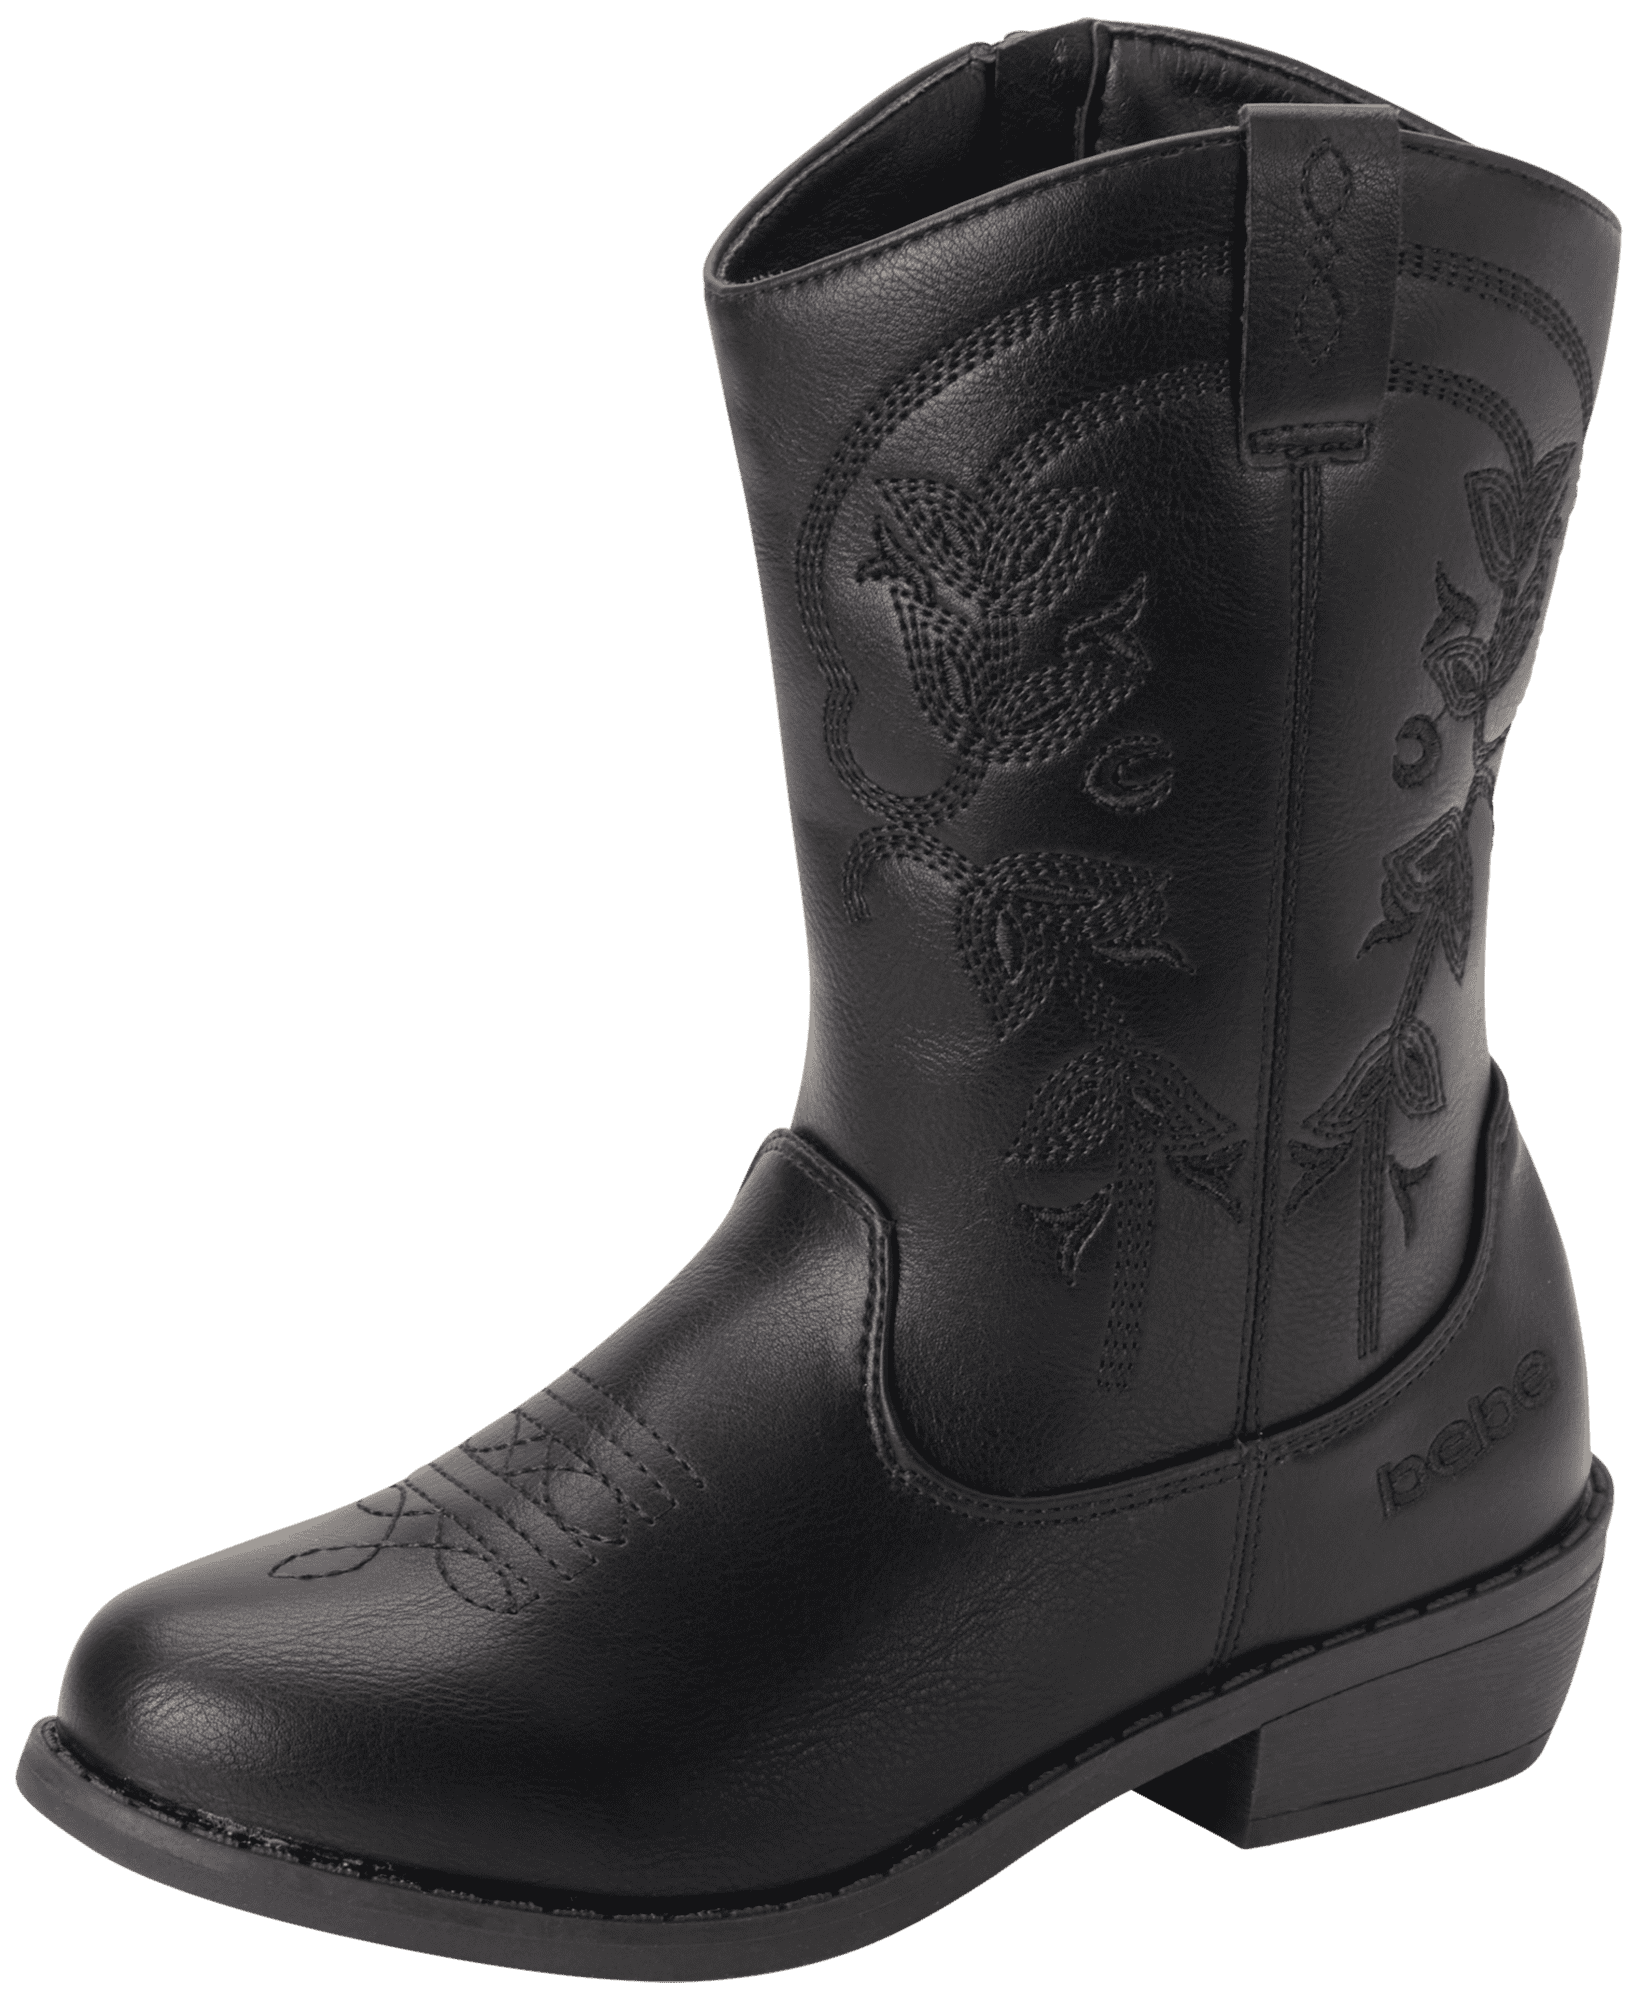 bebe Girls’ Cowgirl Boots – Classic Western Roper Boots (Toddler/Girl ...